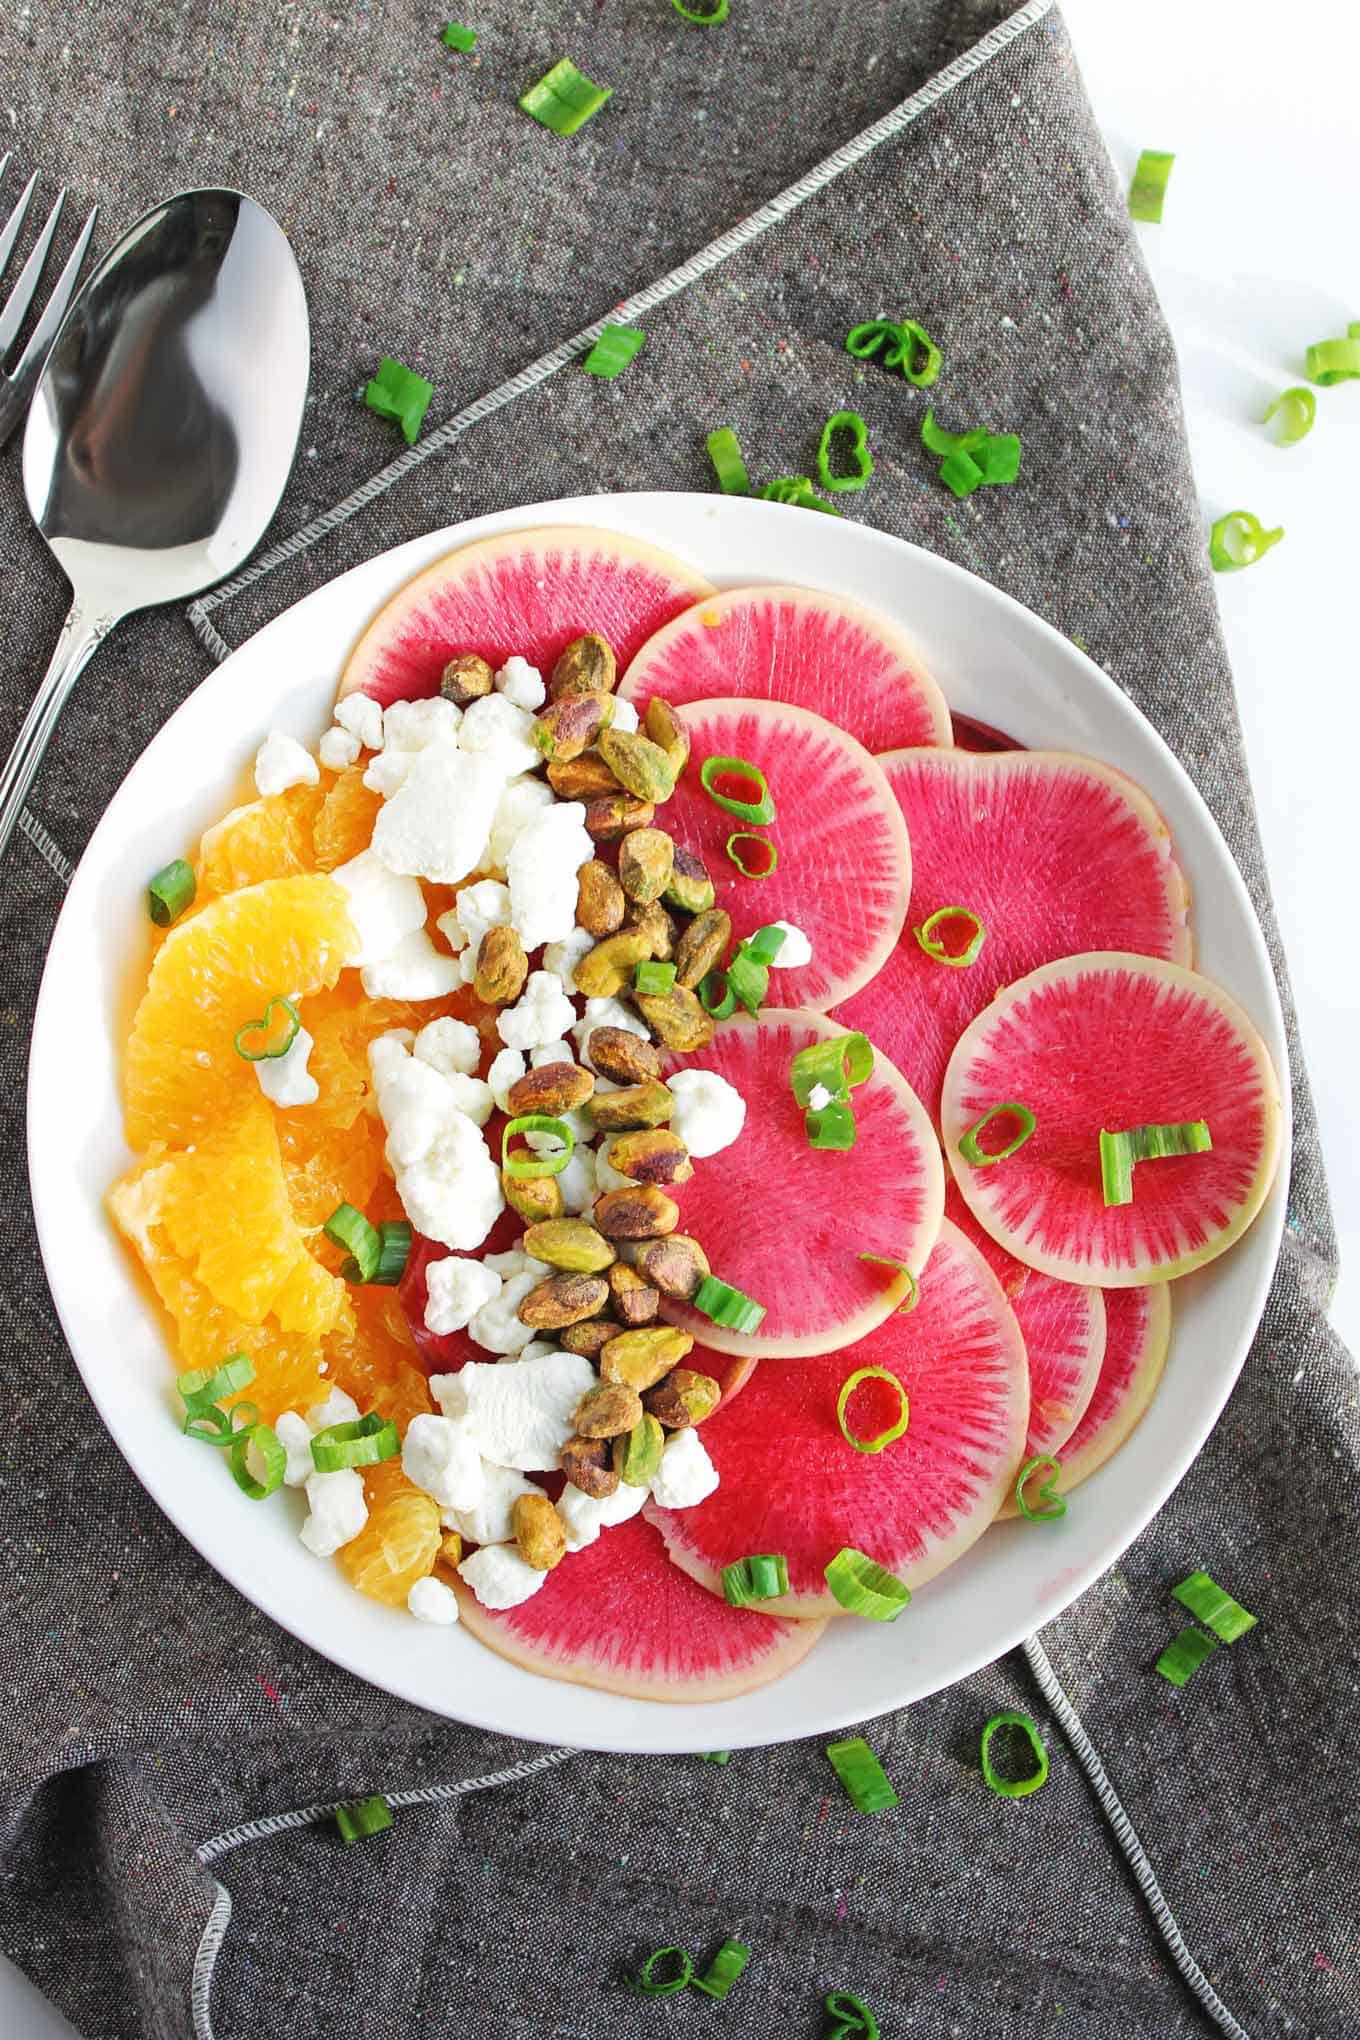 A photo of a watermelon radish salad with oranges, goat cheese, and pistachios.